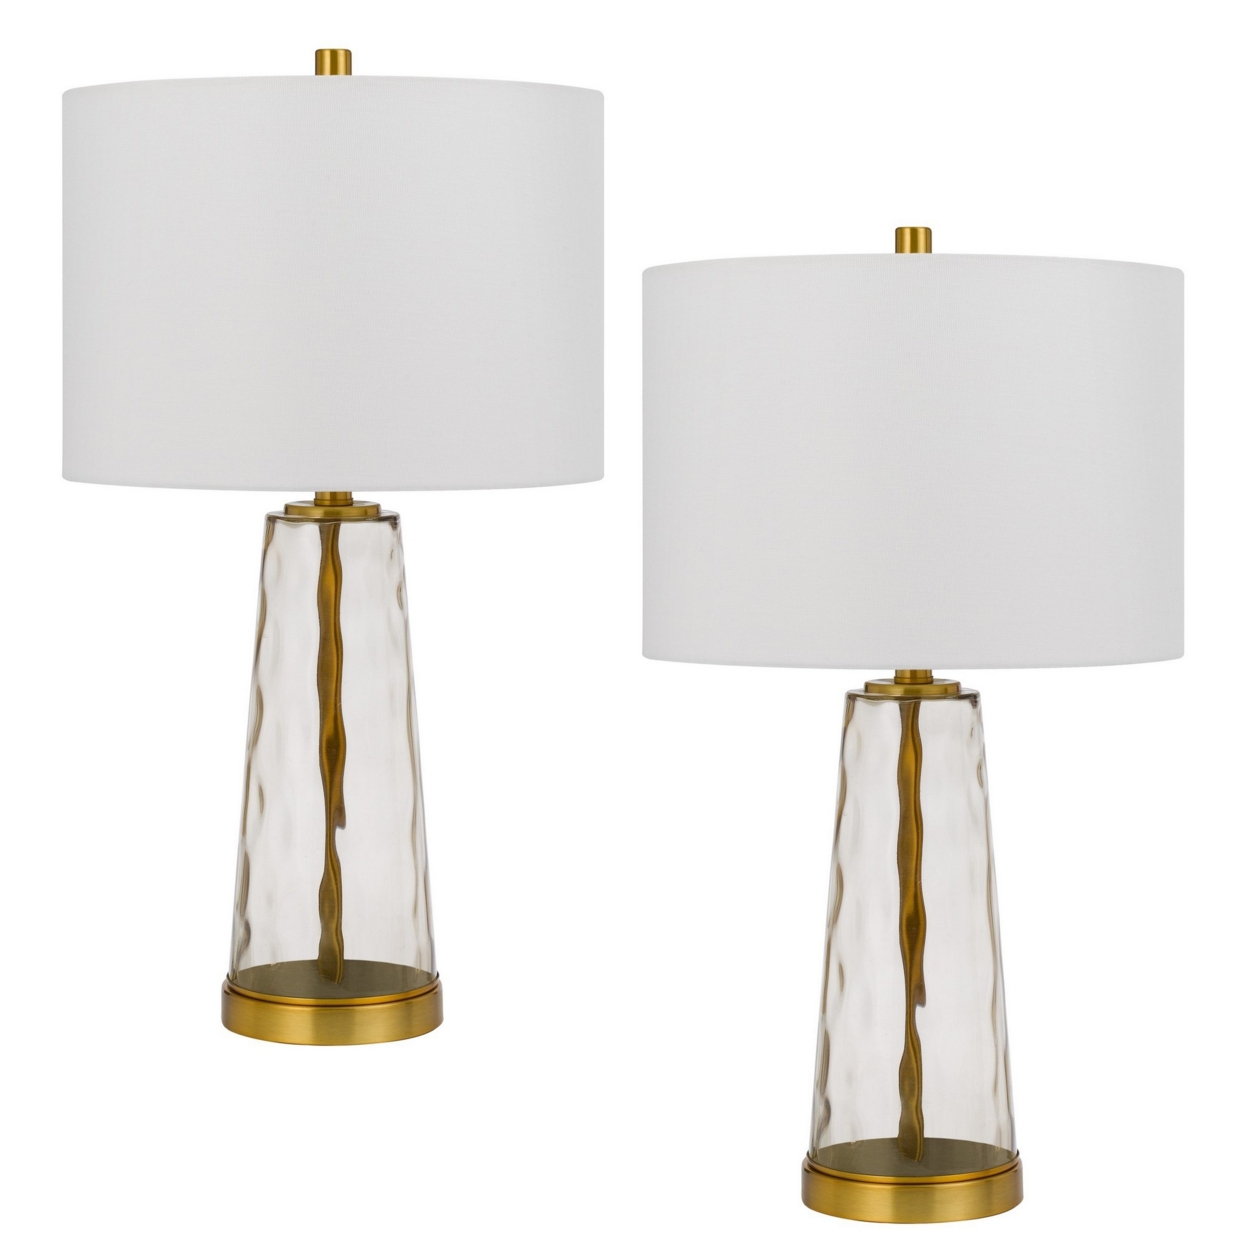 26 Inch Modern Accent Table Lamp Set Of 2, Clear Glass Base, Antique Brass- Saltoro Sherpi